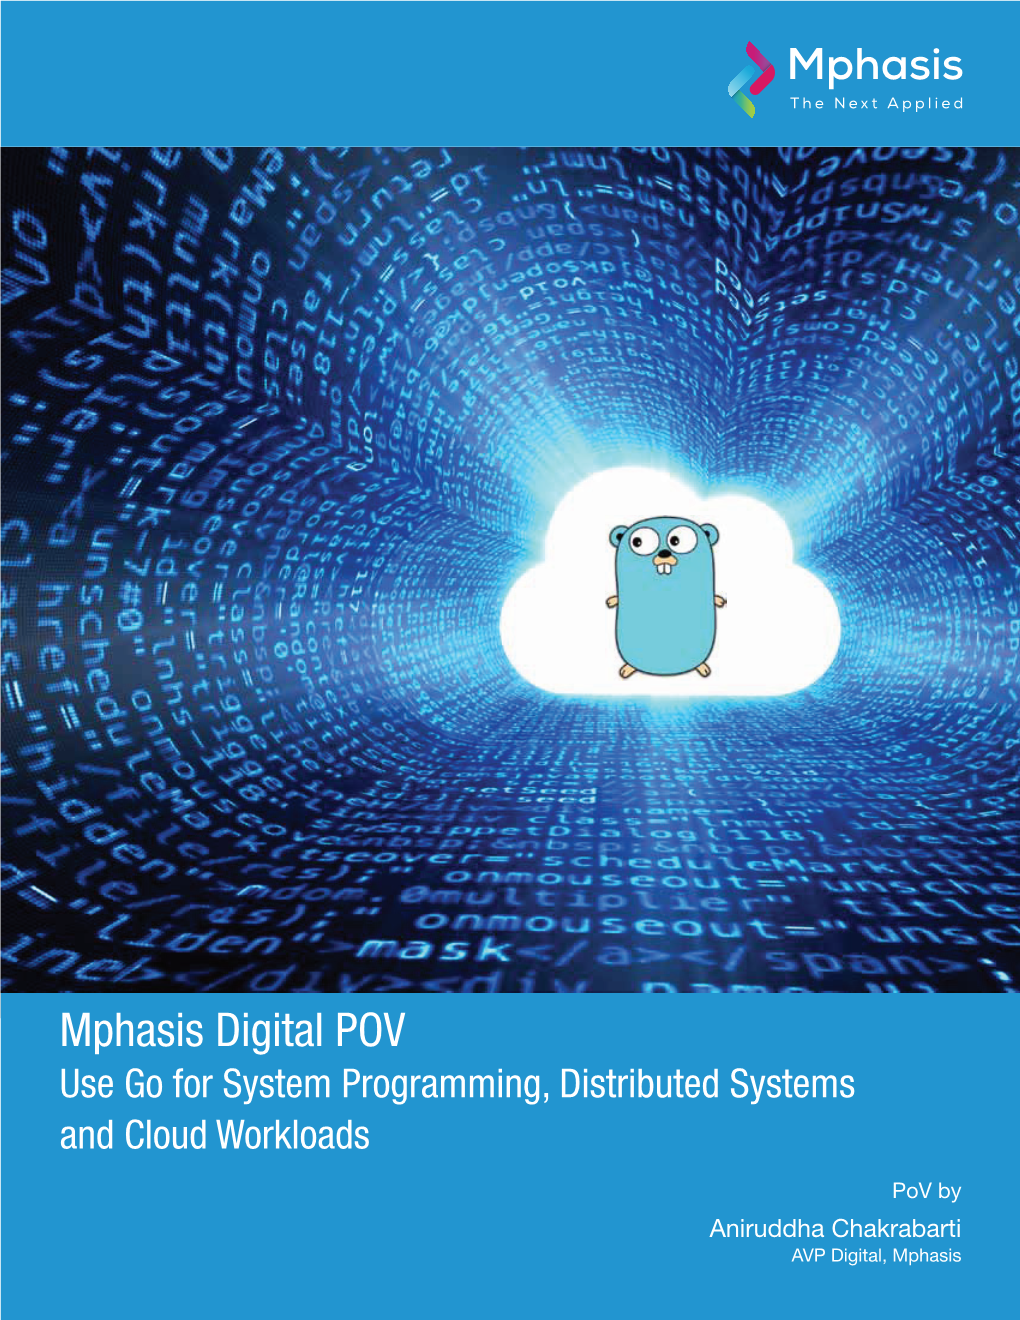 Mphasis Digital POV-Use Go for Systems Programming